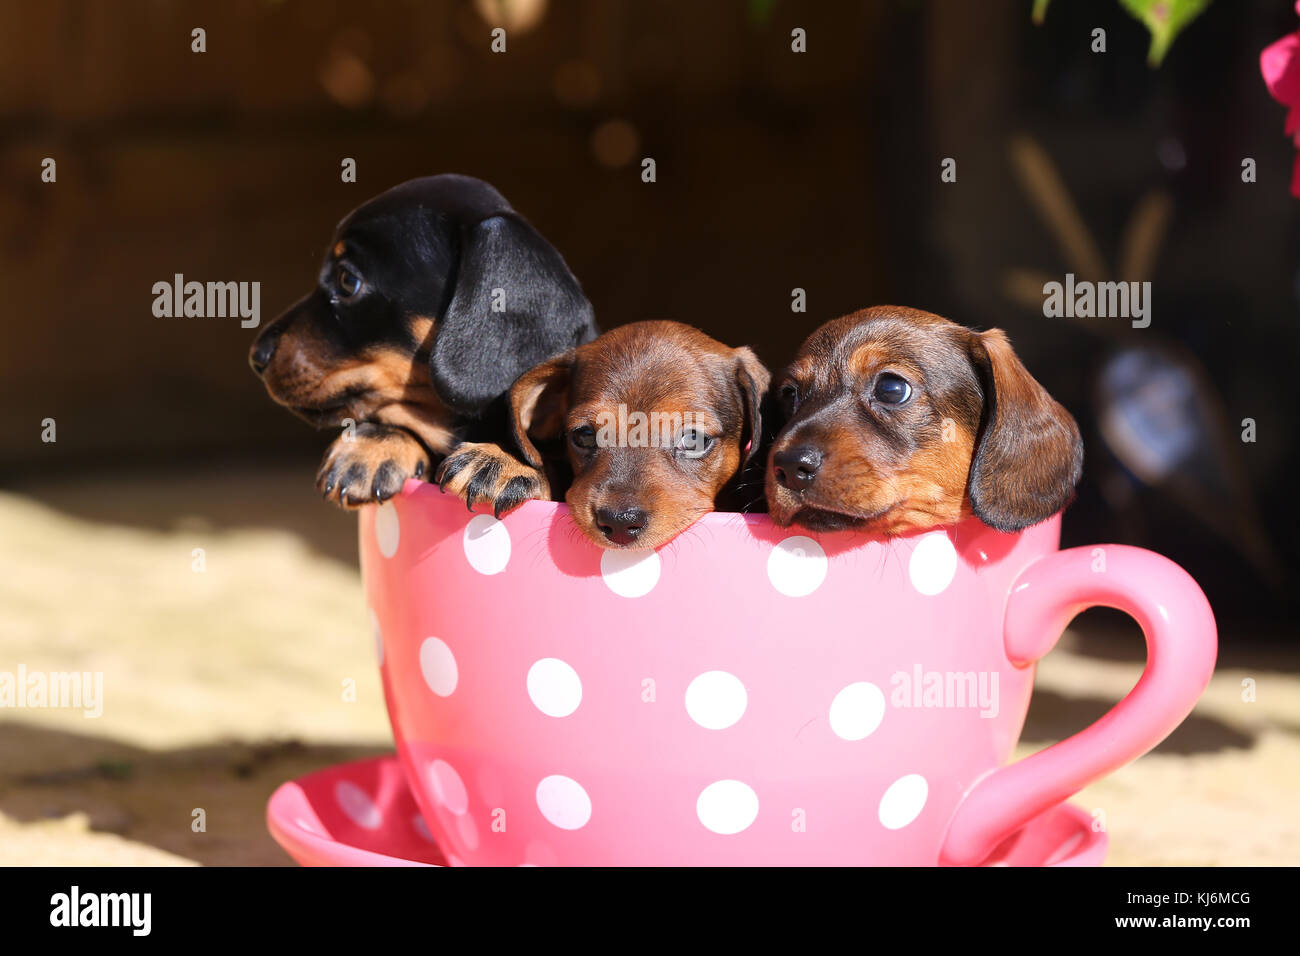 Smooth-haired Miniature Dachshund Puppies sitting together in pink and white spotted tea cup Stock Photo